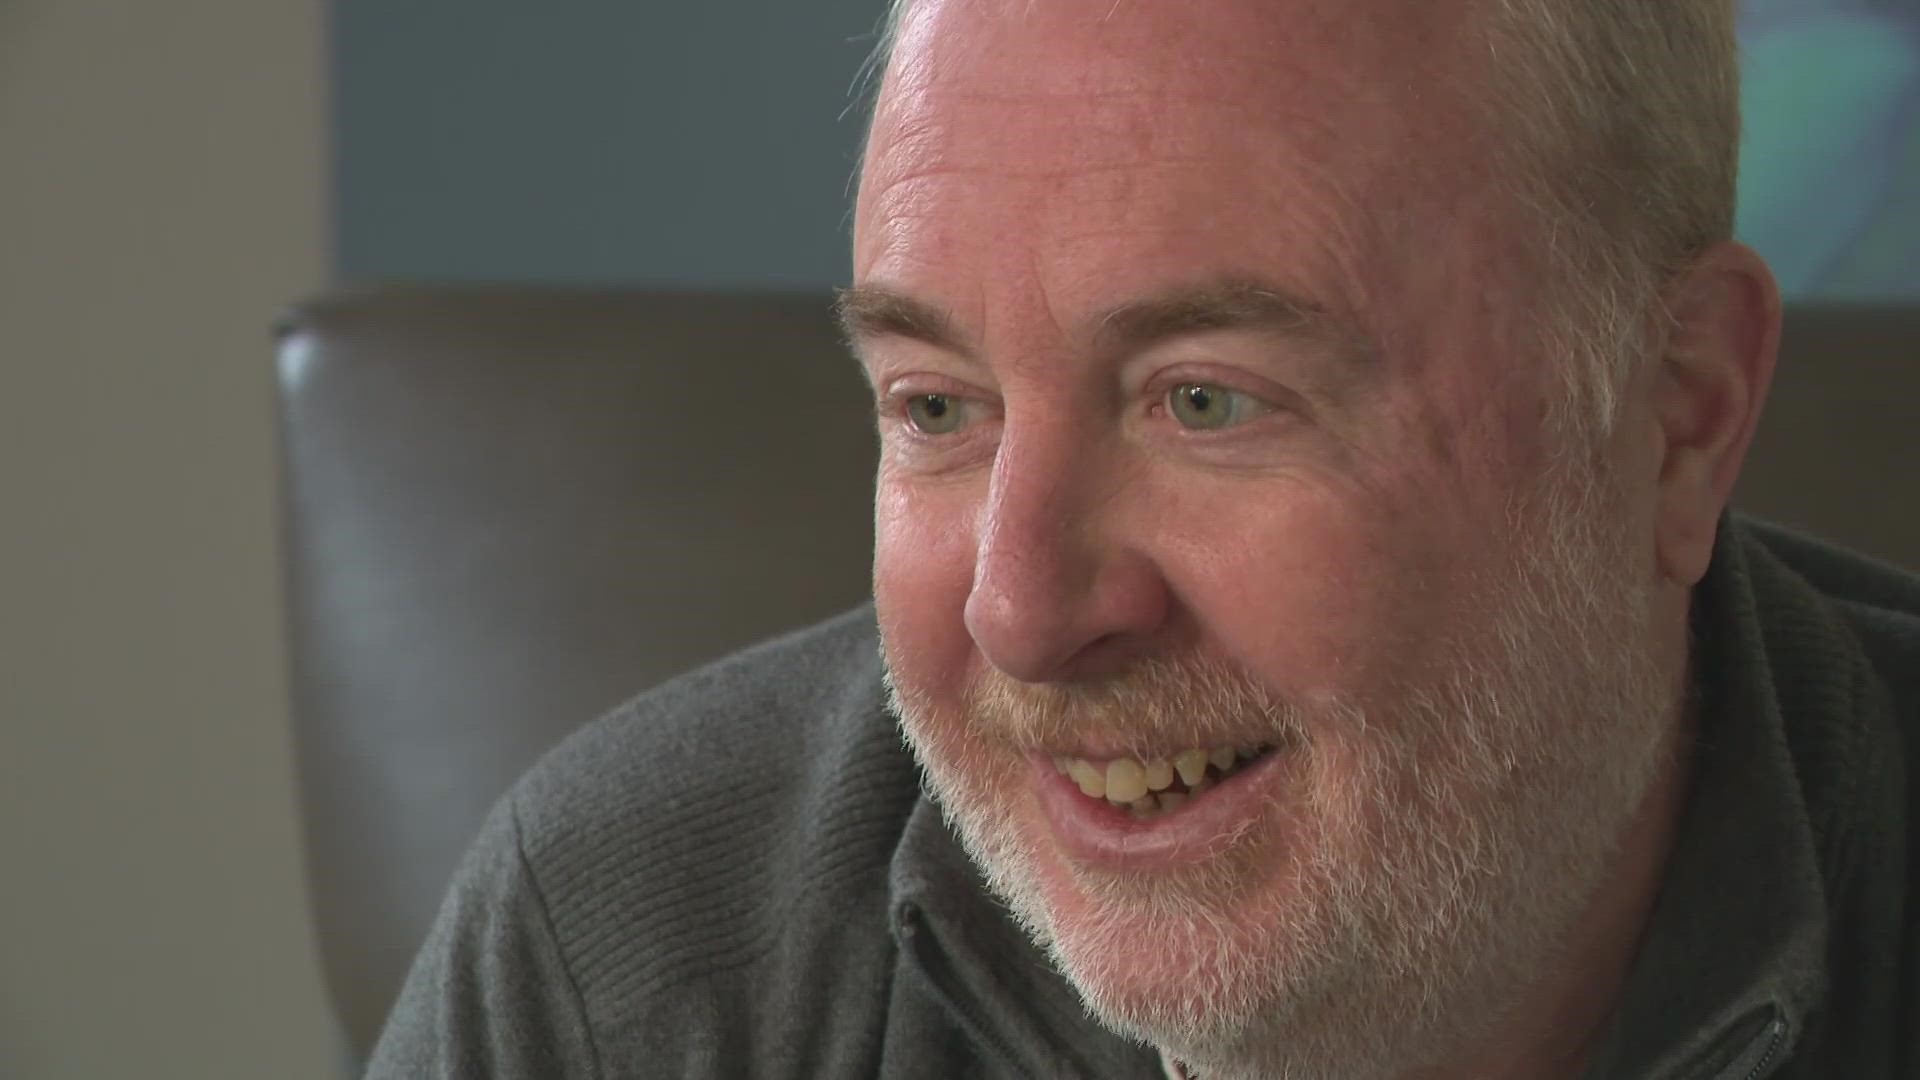 Hal Hedley moved from Florida to Louisville for a job. Now, he's celebrating 21 years as Ronald McDonald House Charities of Kentuckiana's CEO.